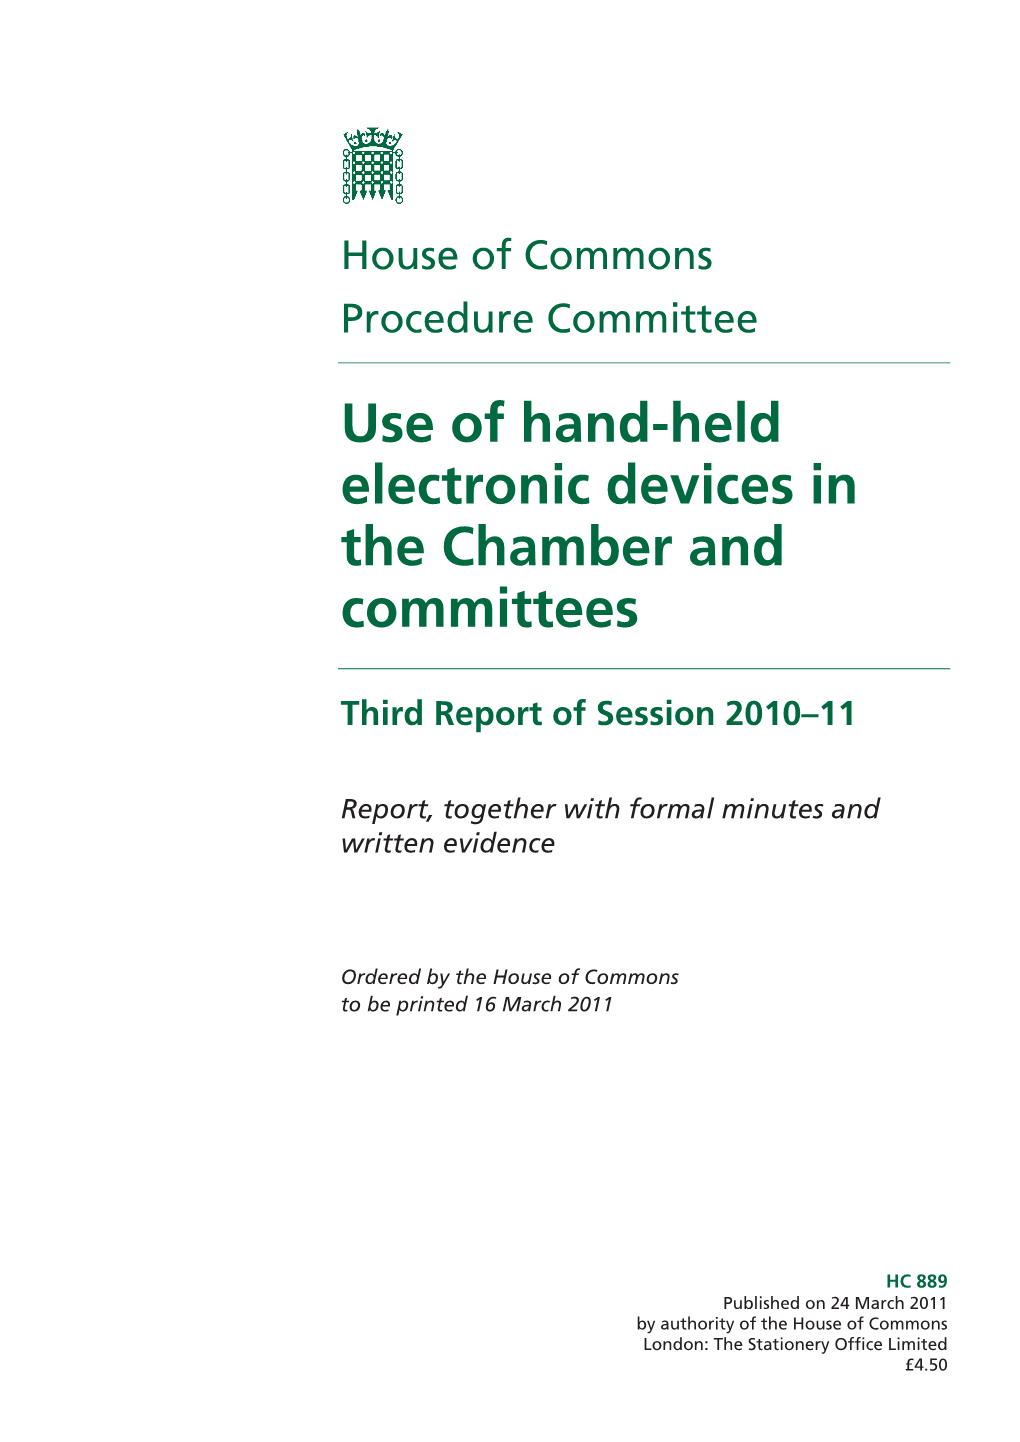 Use of Hand-Held Electronic Devices in the Chamber and Committees